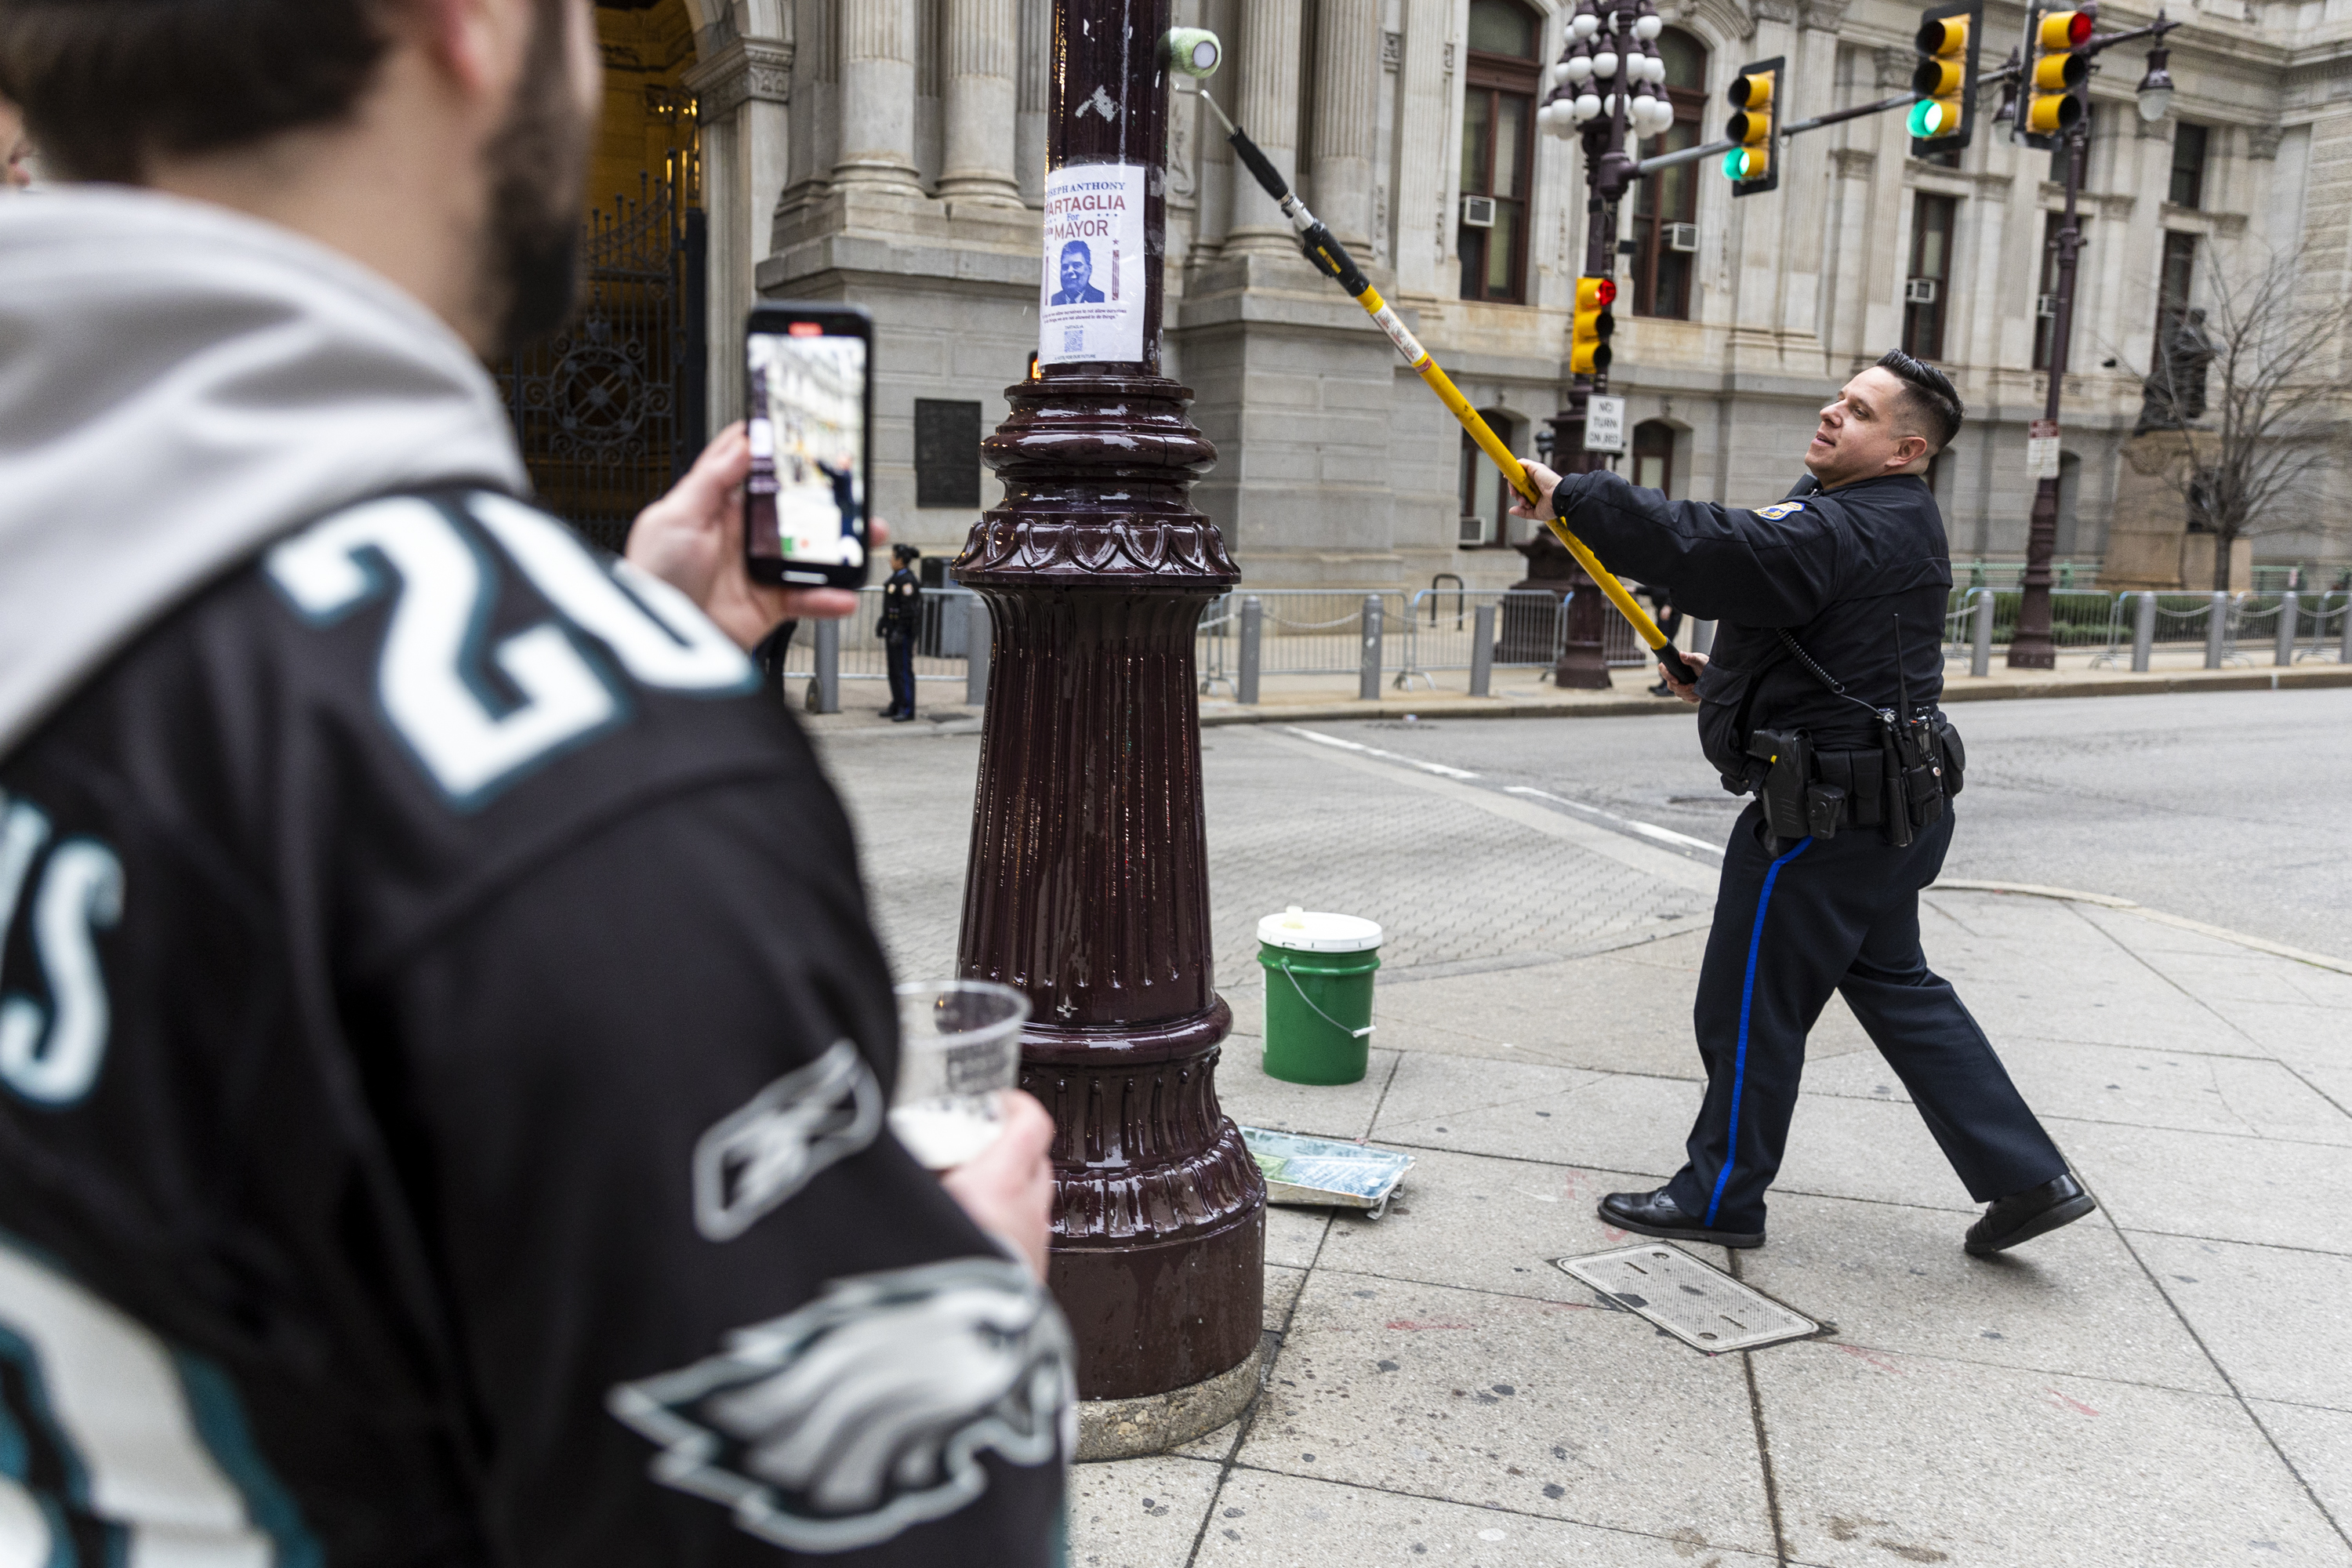 Greased poles in focus as Philly fans flock to streets after